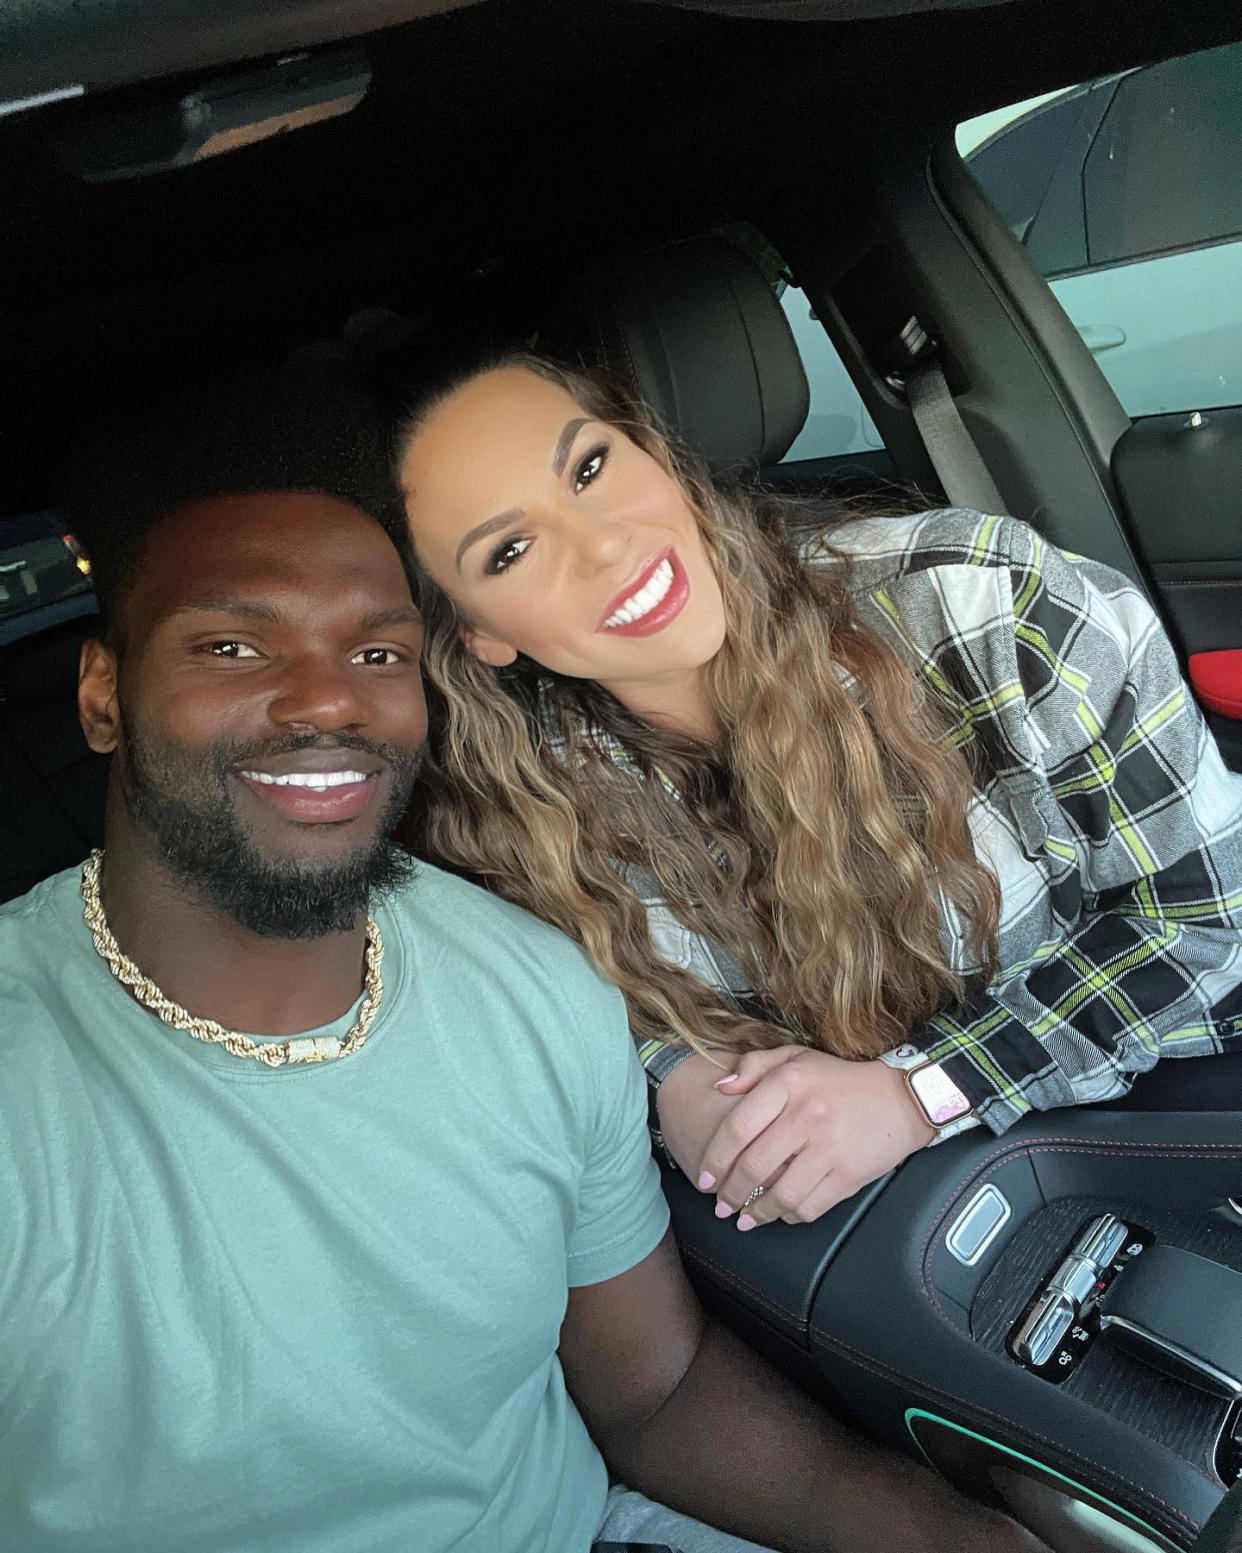 NFL Star Shaquil Barrett and Wife Jordanna Barrett Expecting Baby 1 Month After Daughter Arrayah's Death